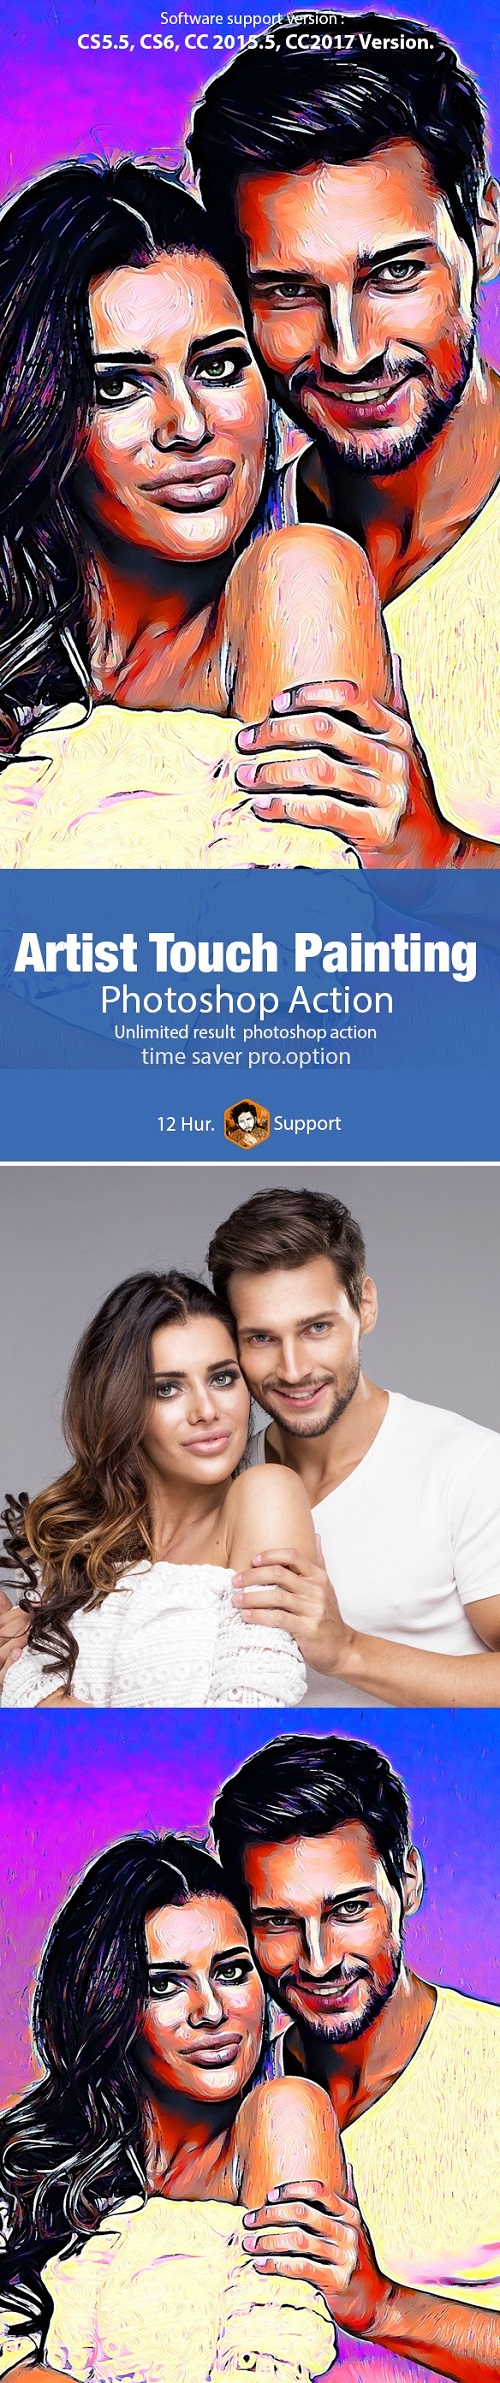 Artist Touch Painting - 19996566